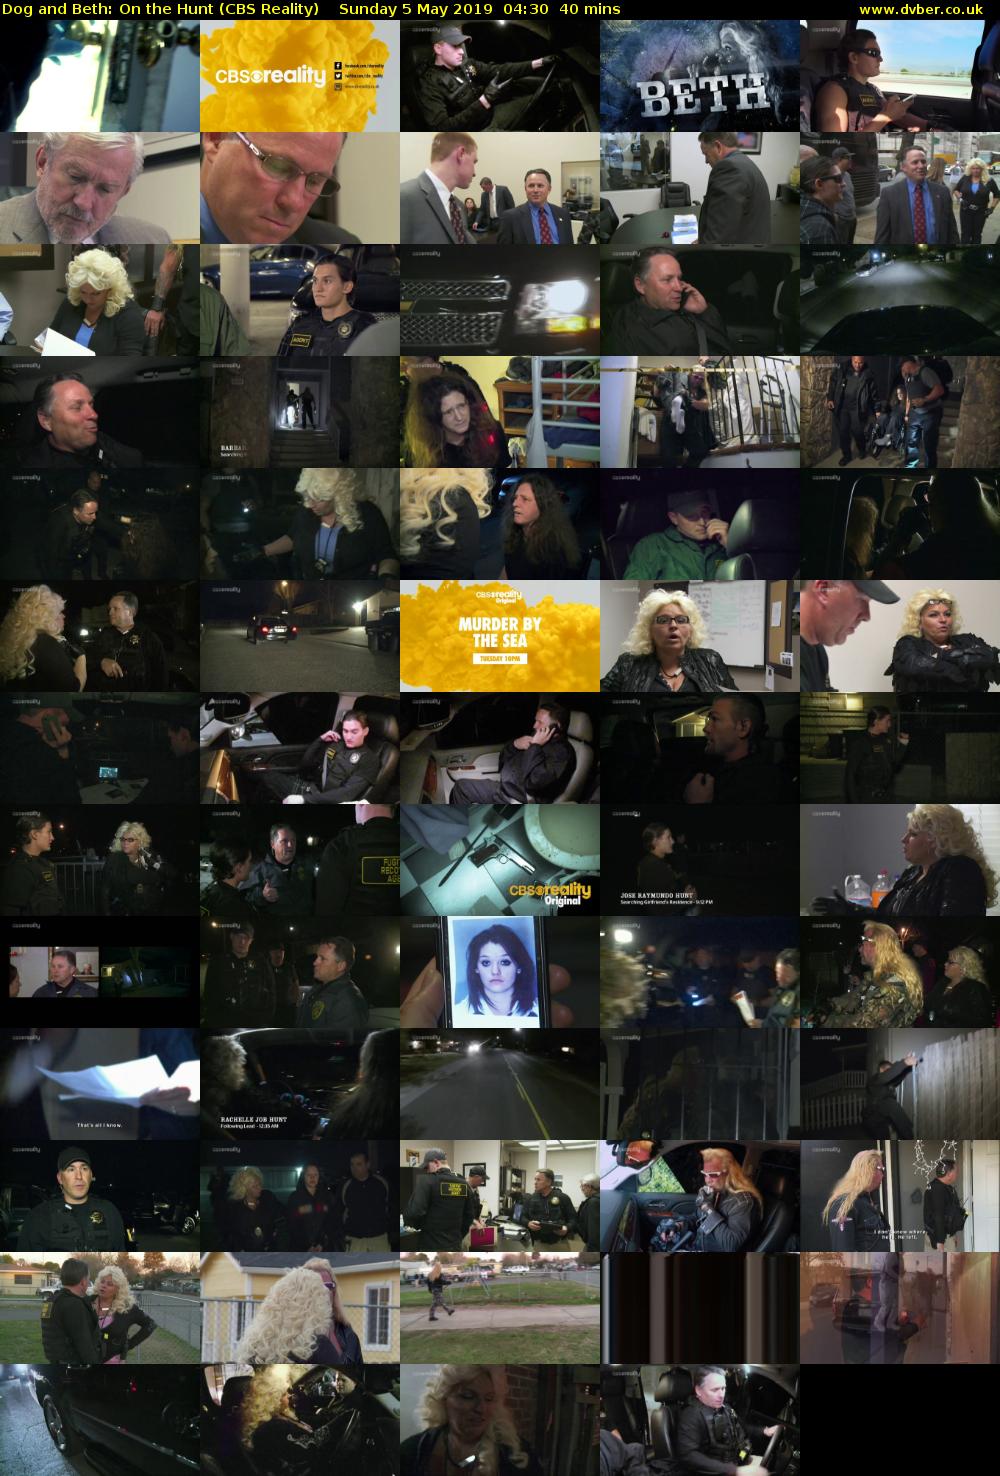 Dog and Beth: On the Hunt (CBS Reality) Sunday 5 May 2019 04:30 - 05:10